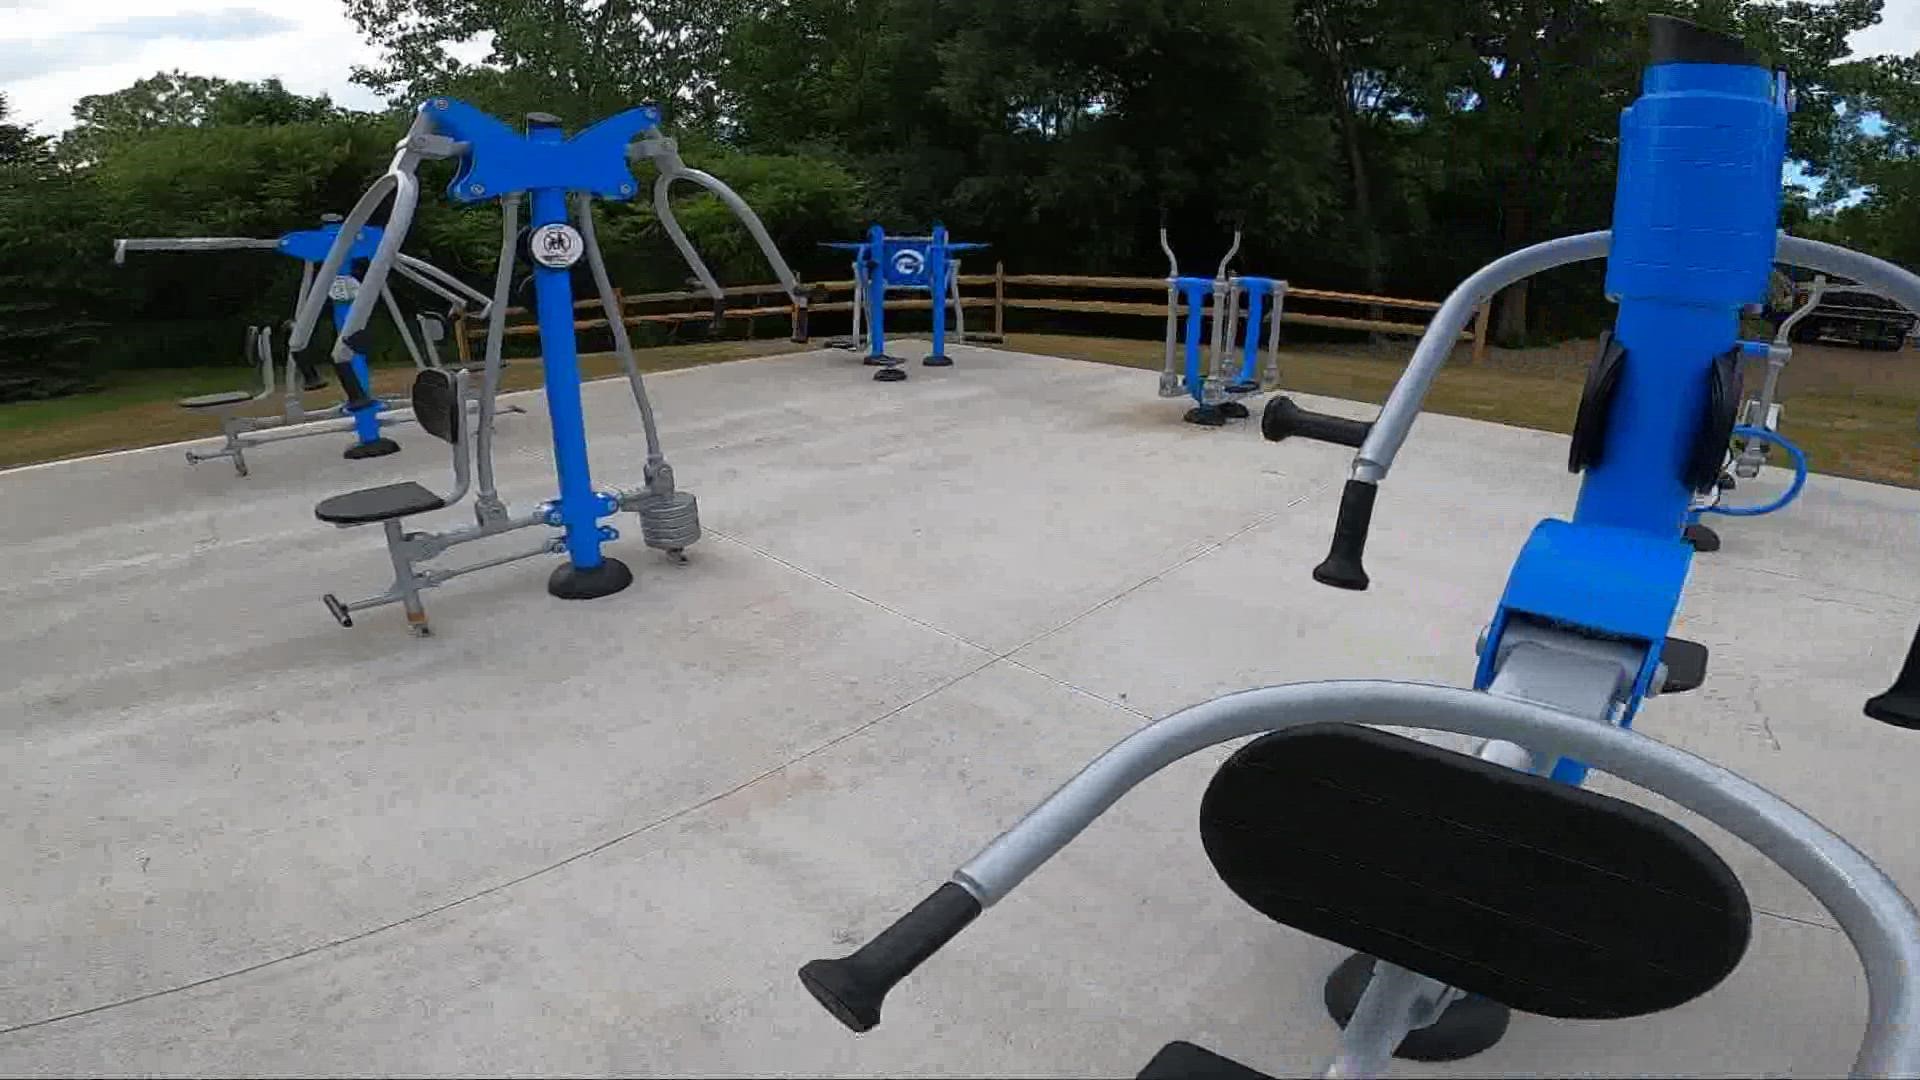 3News' Carmen Blackwell visits the new outdoor fitness park in Beachwood that aims to revolutionize  outdoor exercise